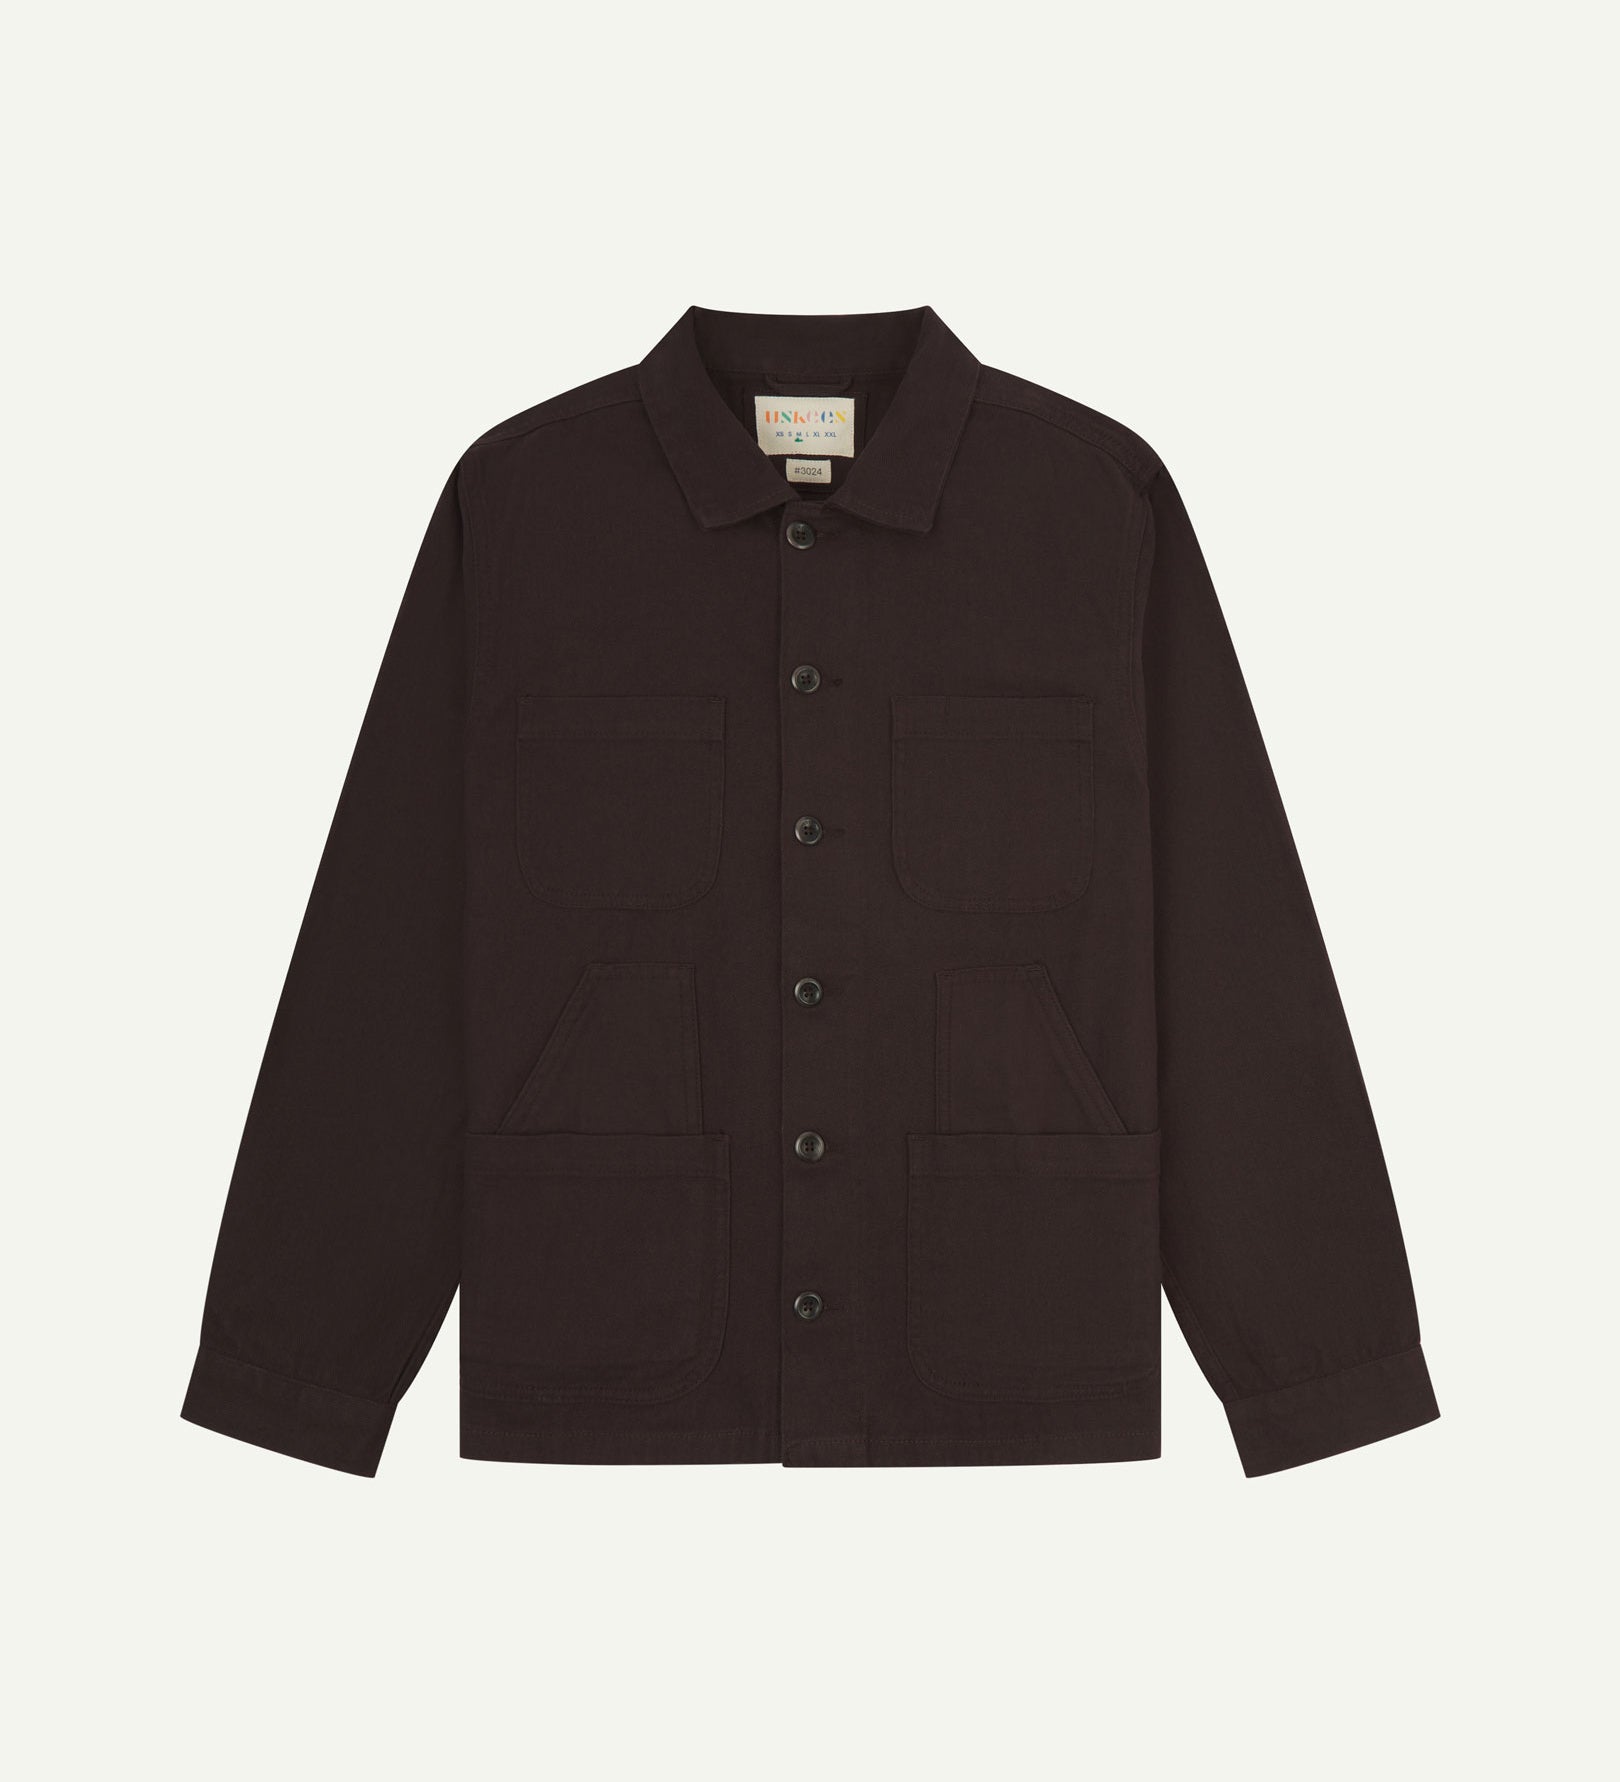 Burgundy-brown buttoned organic cotton-drill overshirt from Uskees with clear view of layered patch pockets, reinforced elbows and Uskees branding label.